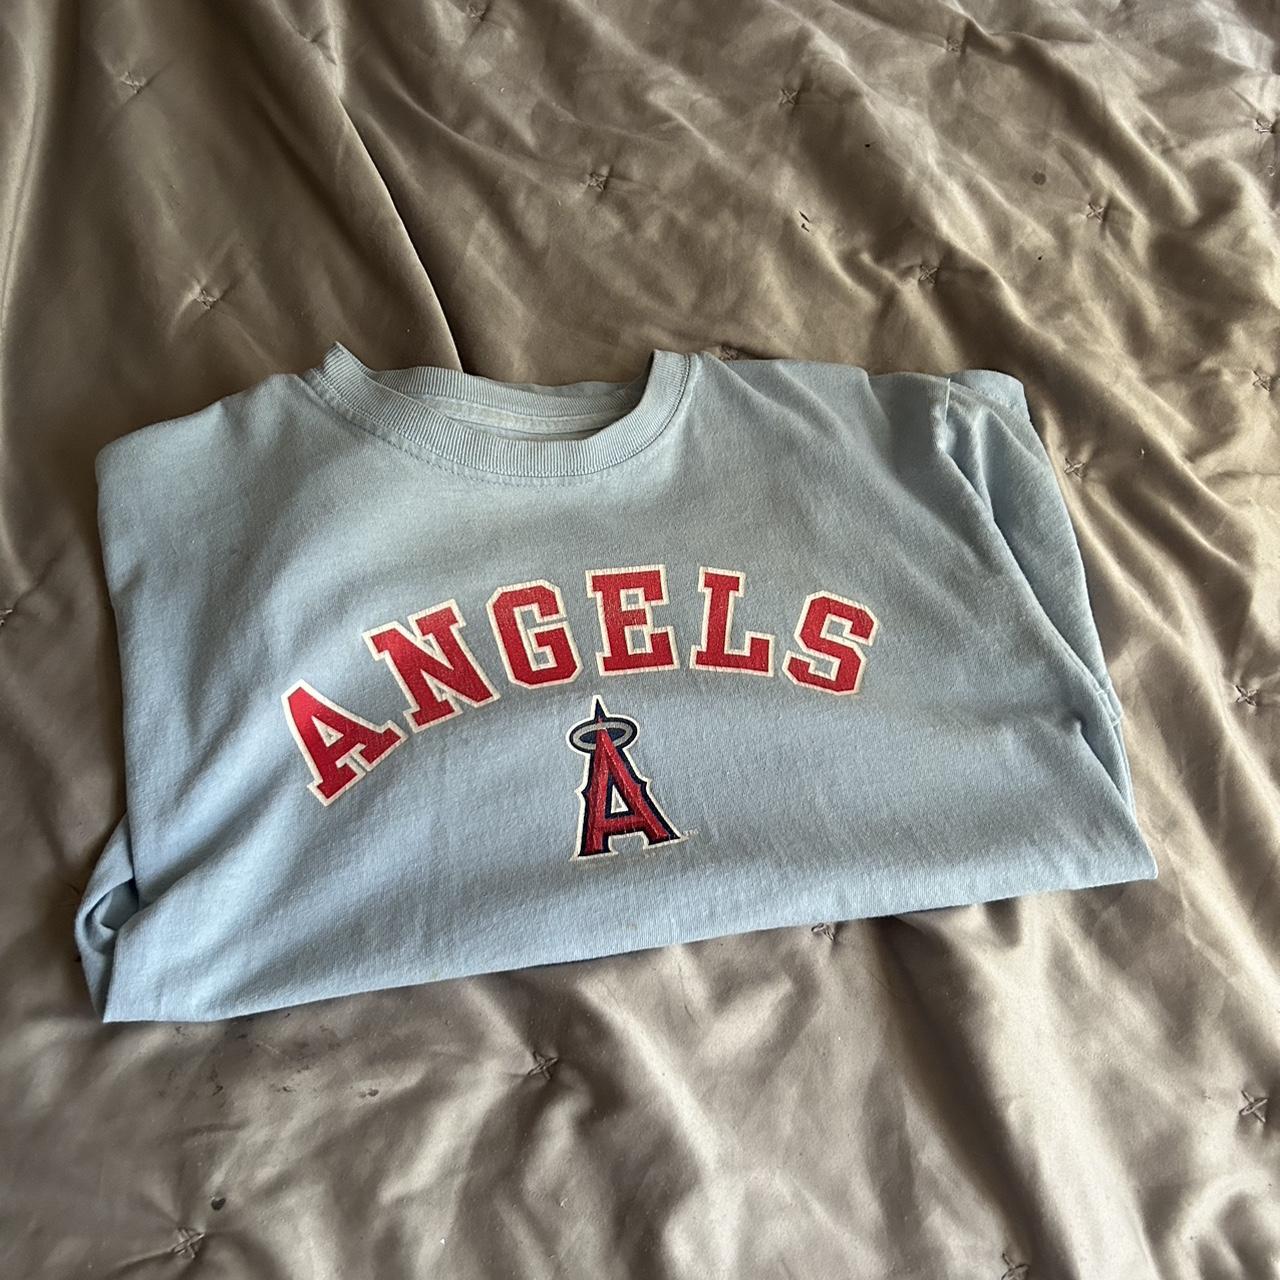 Los Angeles angels baseball t-shirt. Small stain on - Depop